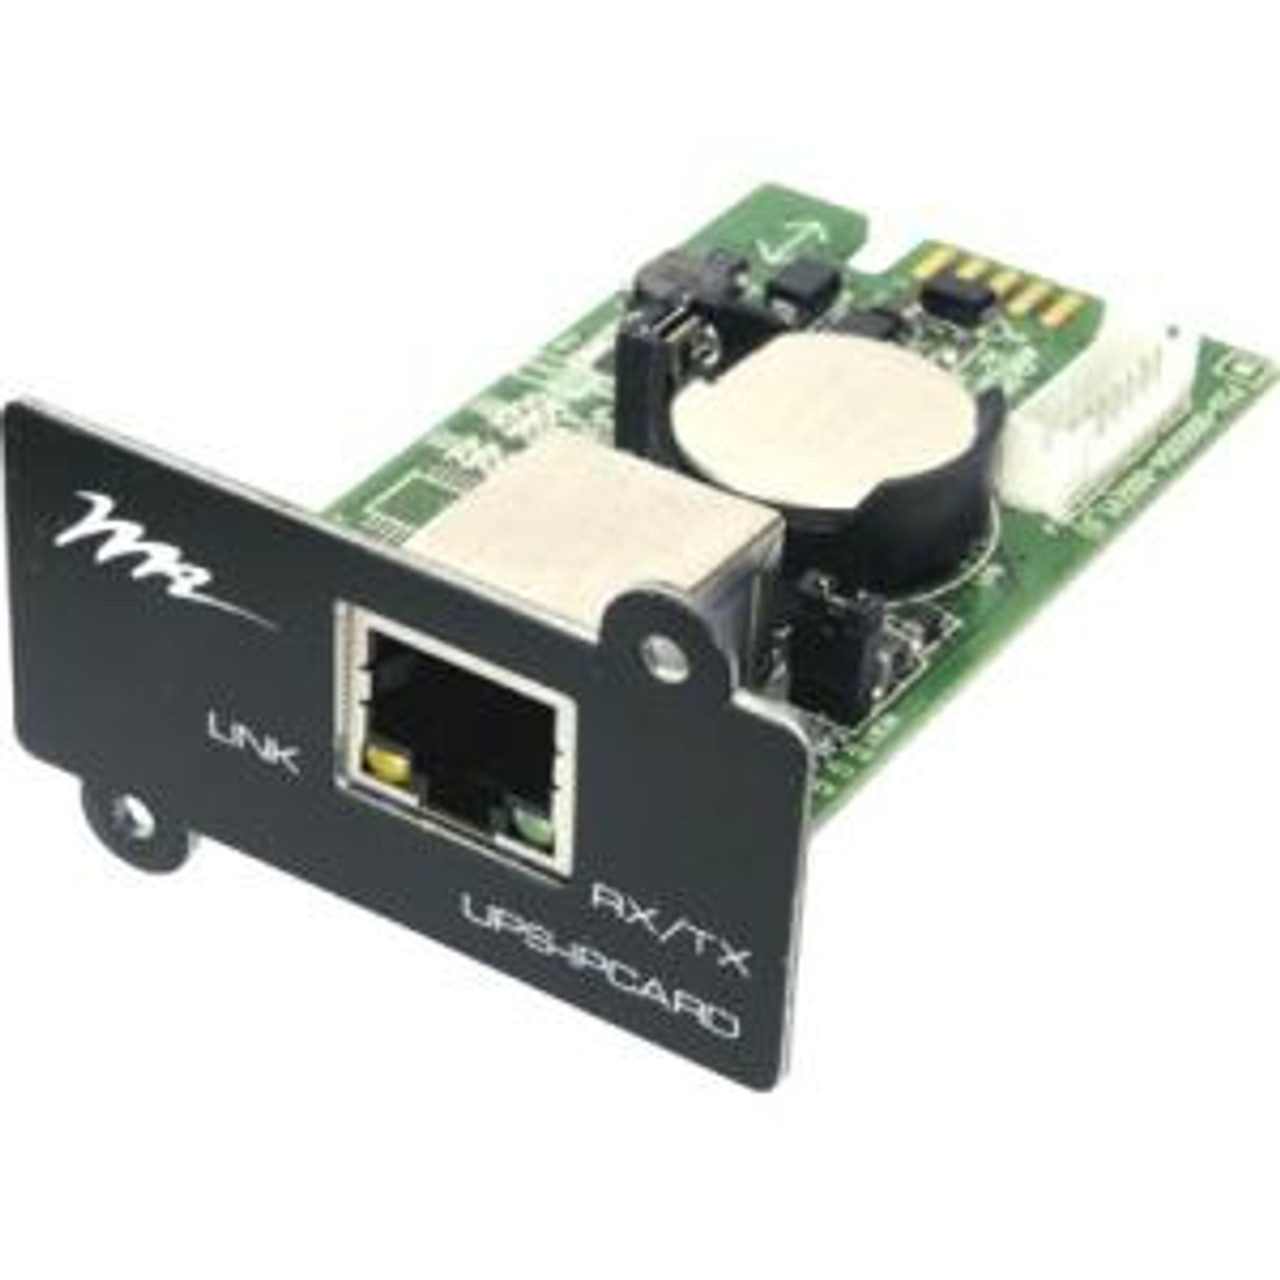 UPS-IPCARD Middle Atlantic Products UPS Network Interface Card 1 Port(s) 1 Twisted Pair